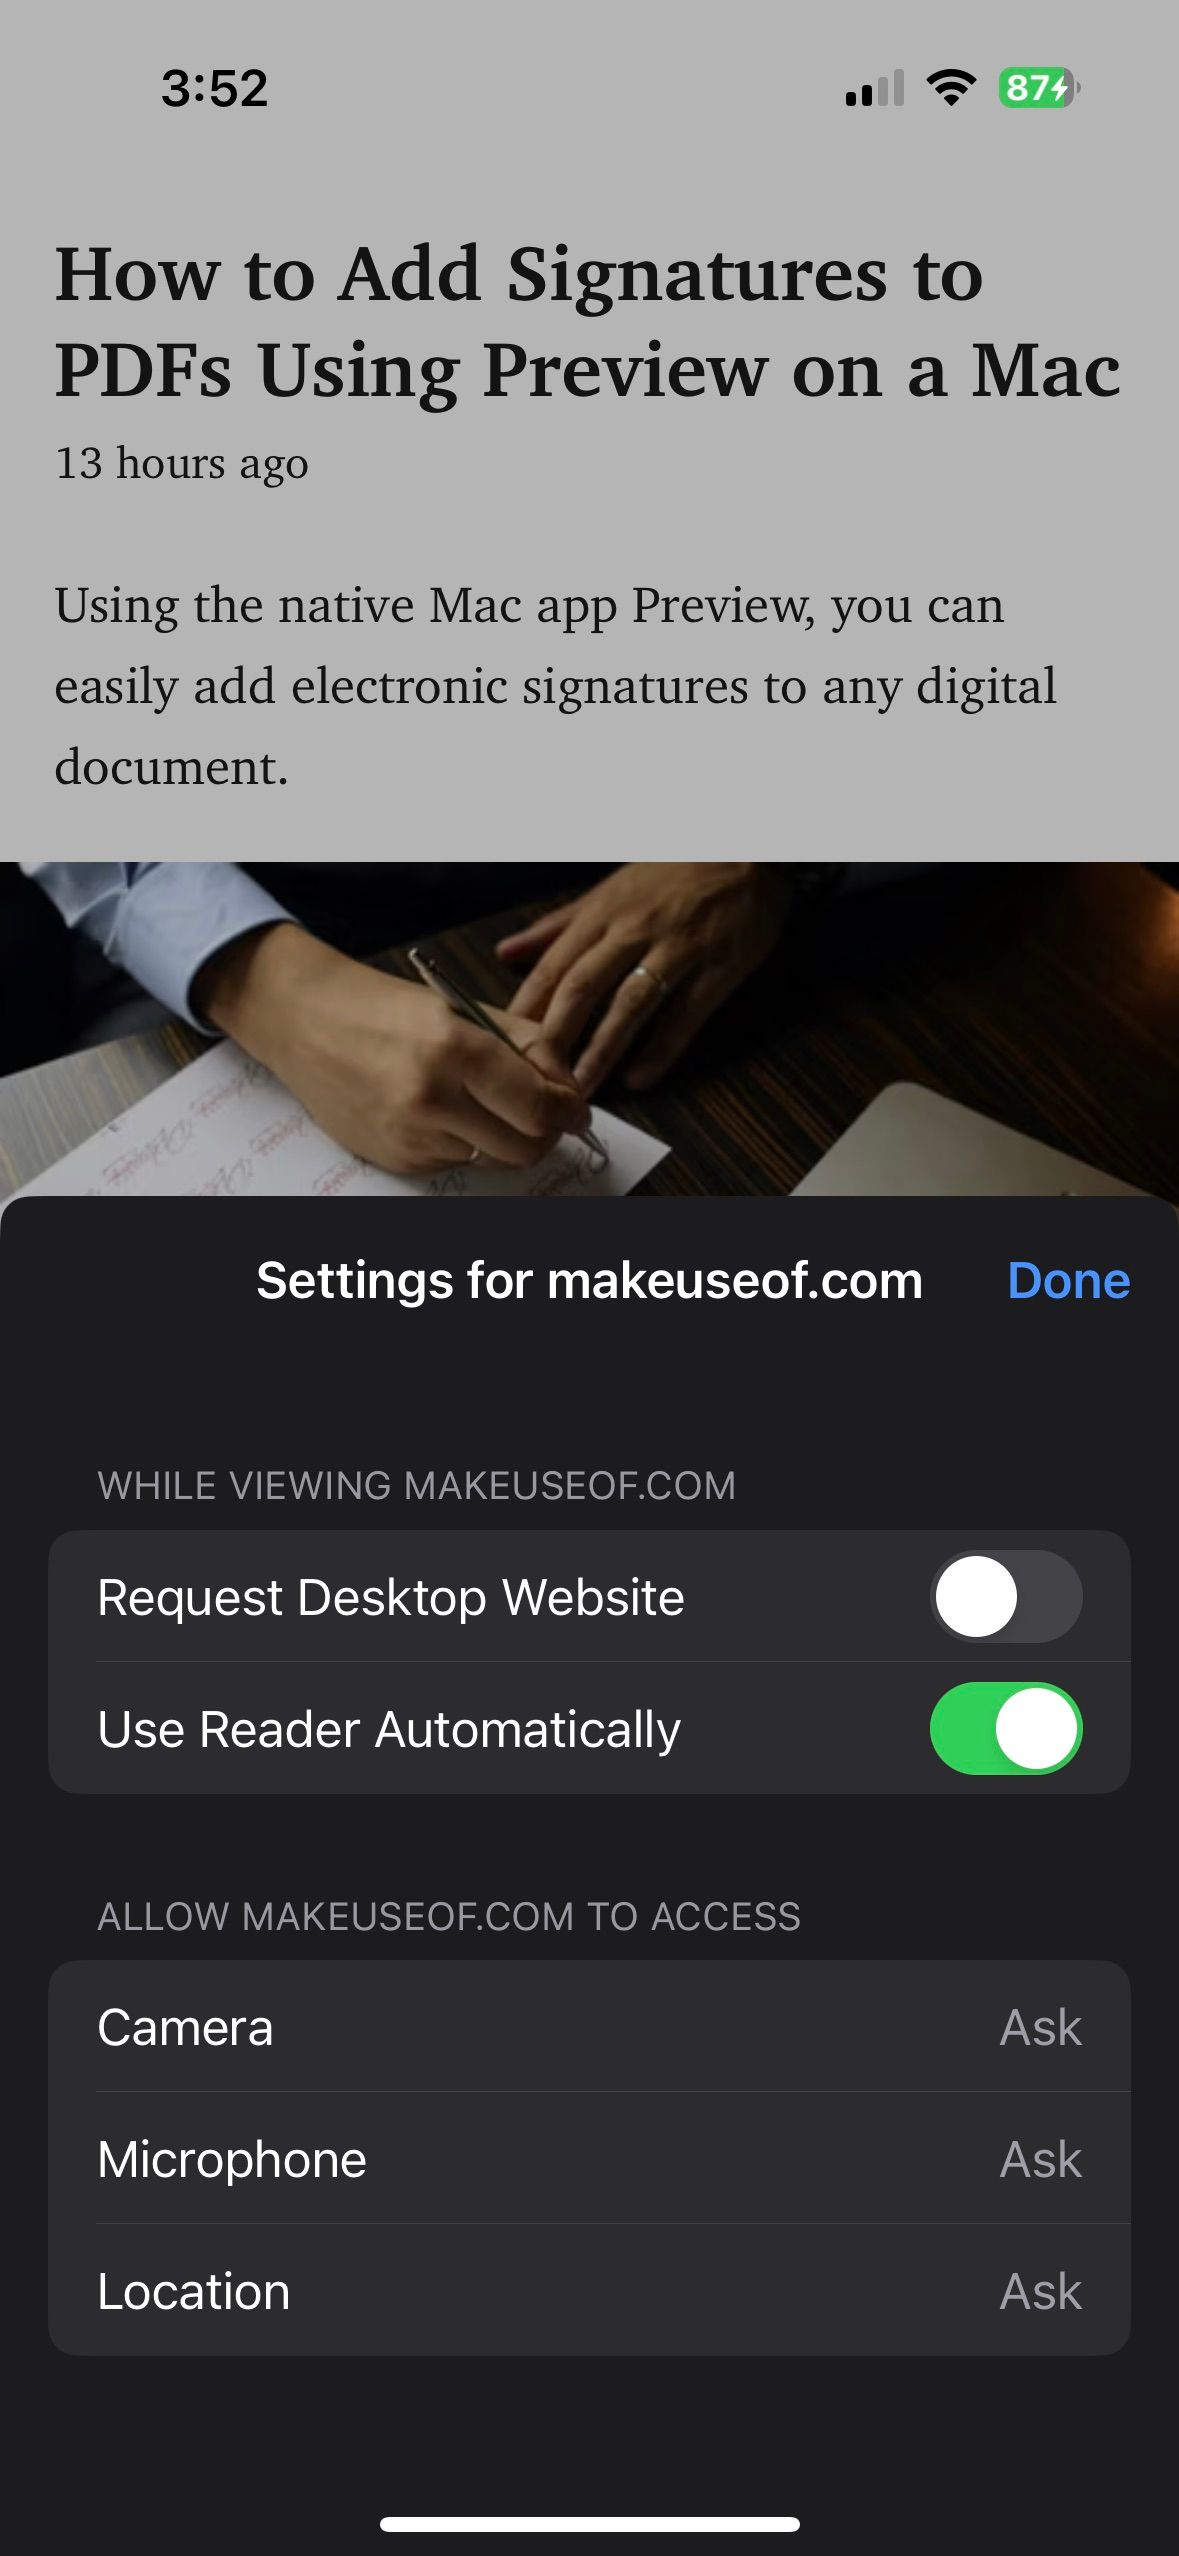 activate automatic reader mode in Safari on iPhone